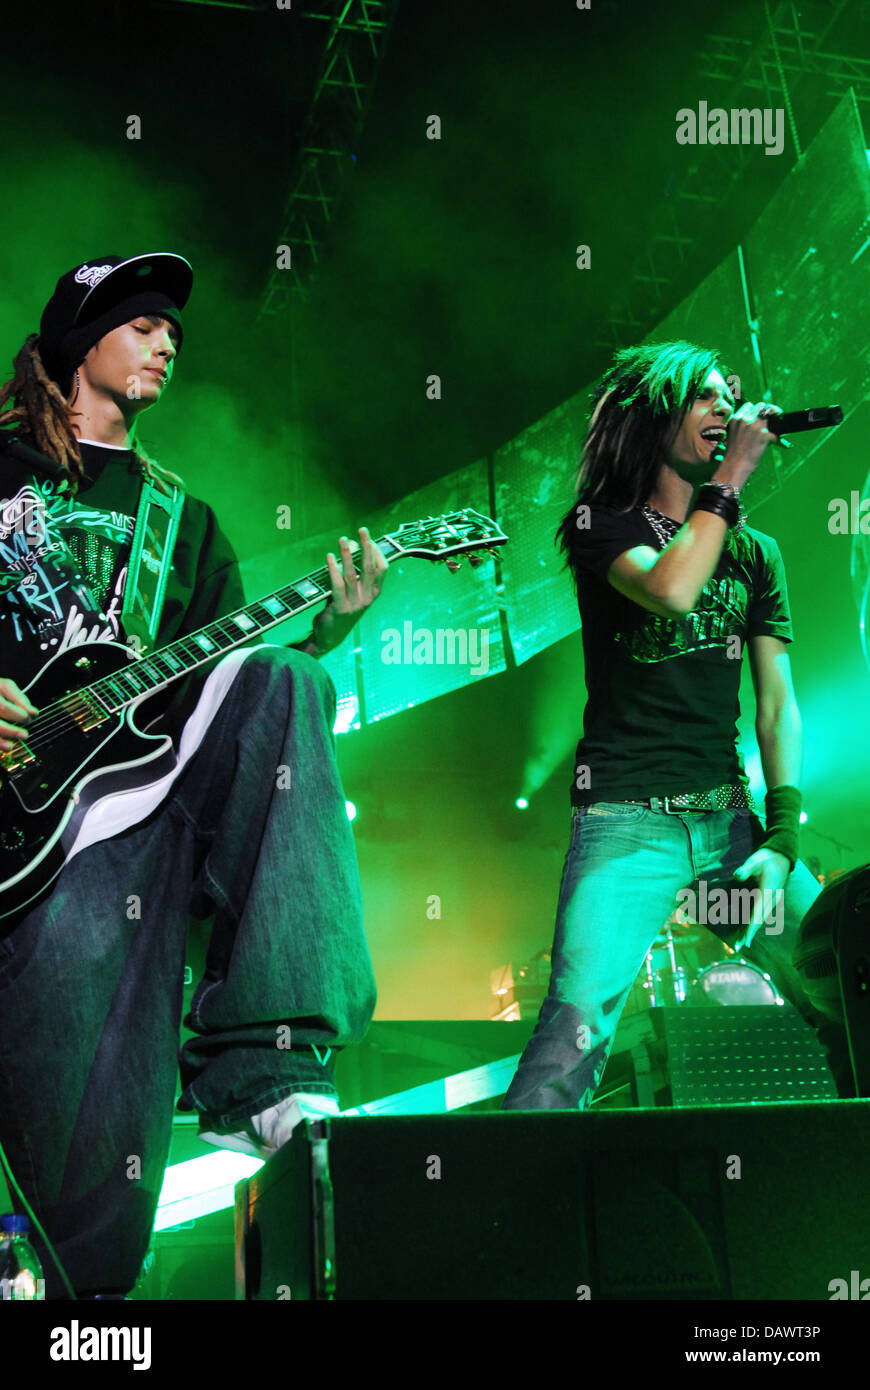 Tokio Hotel singer Bill Kaulitz (R) and guitarist Tom Kaulitz (L) pictured during a show of his band in Hamburg, Germany, 01 May 2007. Photo: Jens Schierenbeck Stock Photo